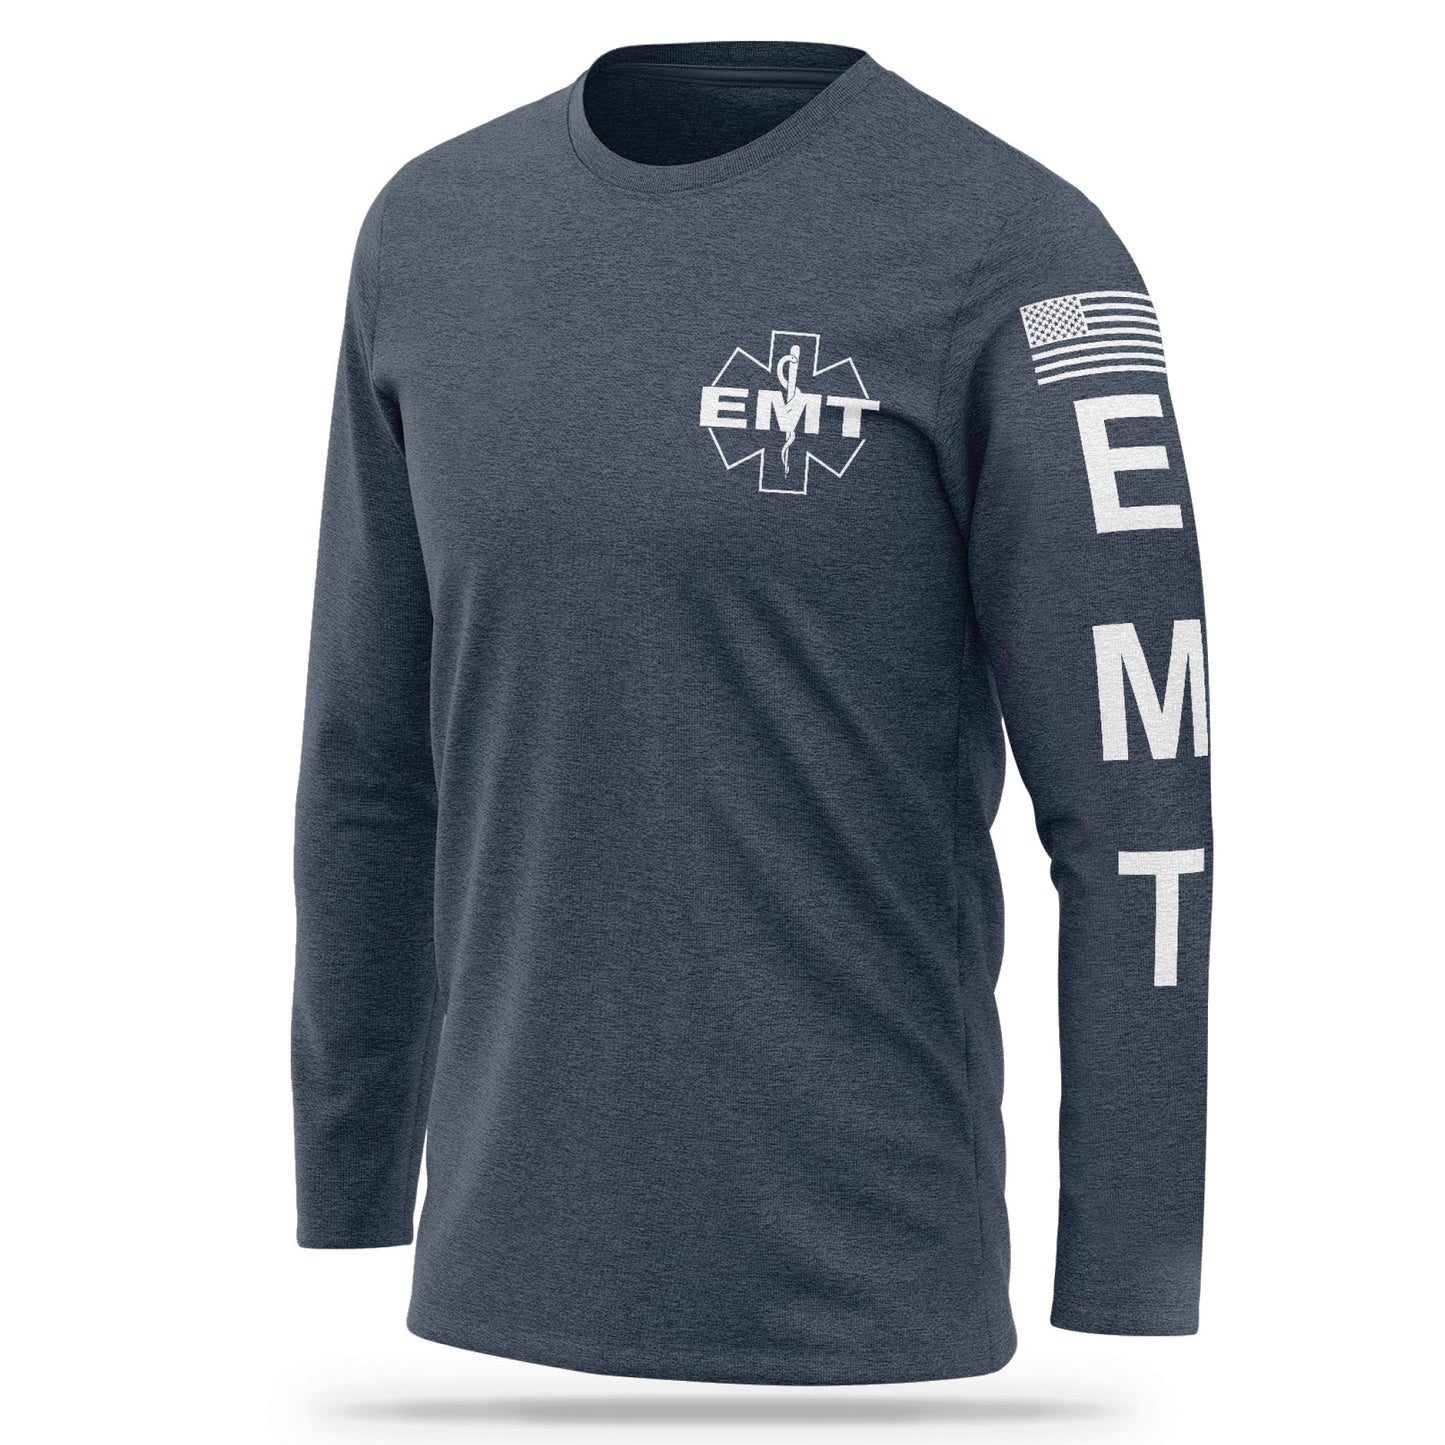 [EMT] Cotton Blend Long Sleeve [NVY/WHT]-13 Fifty Apparel